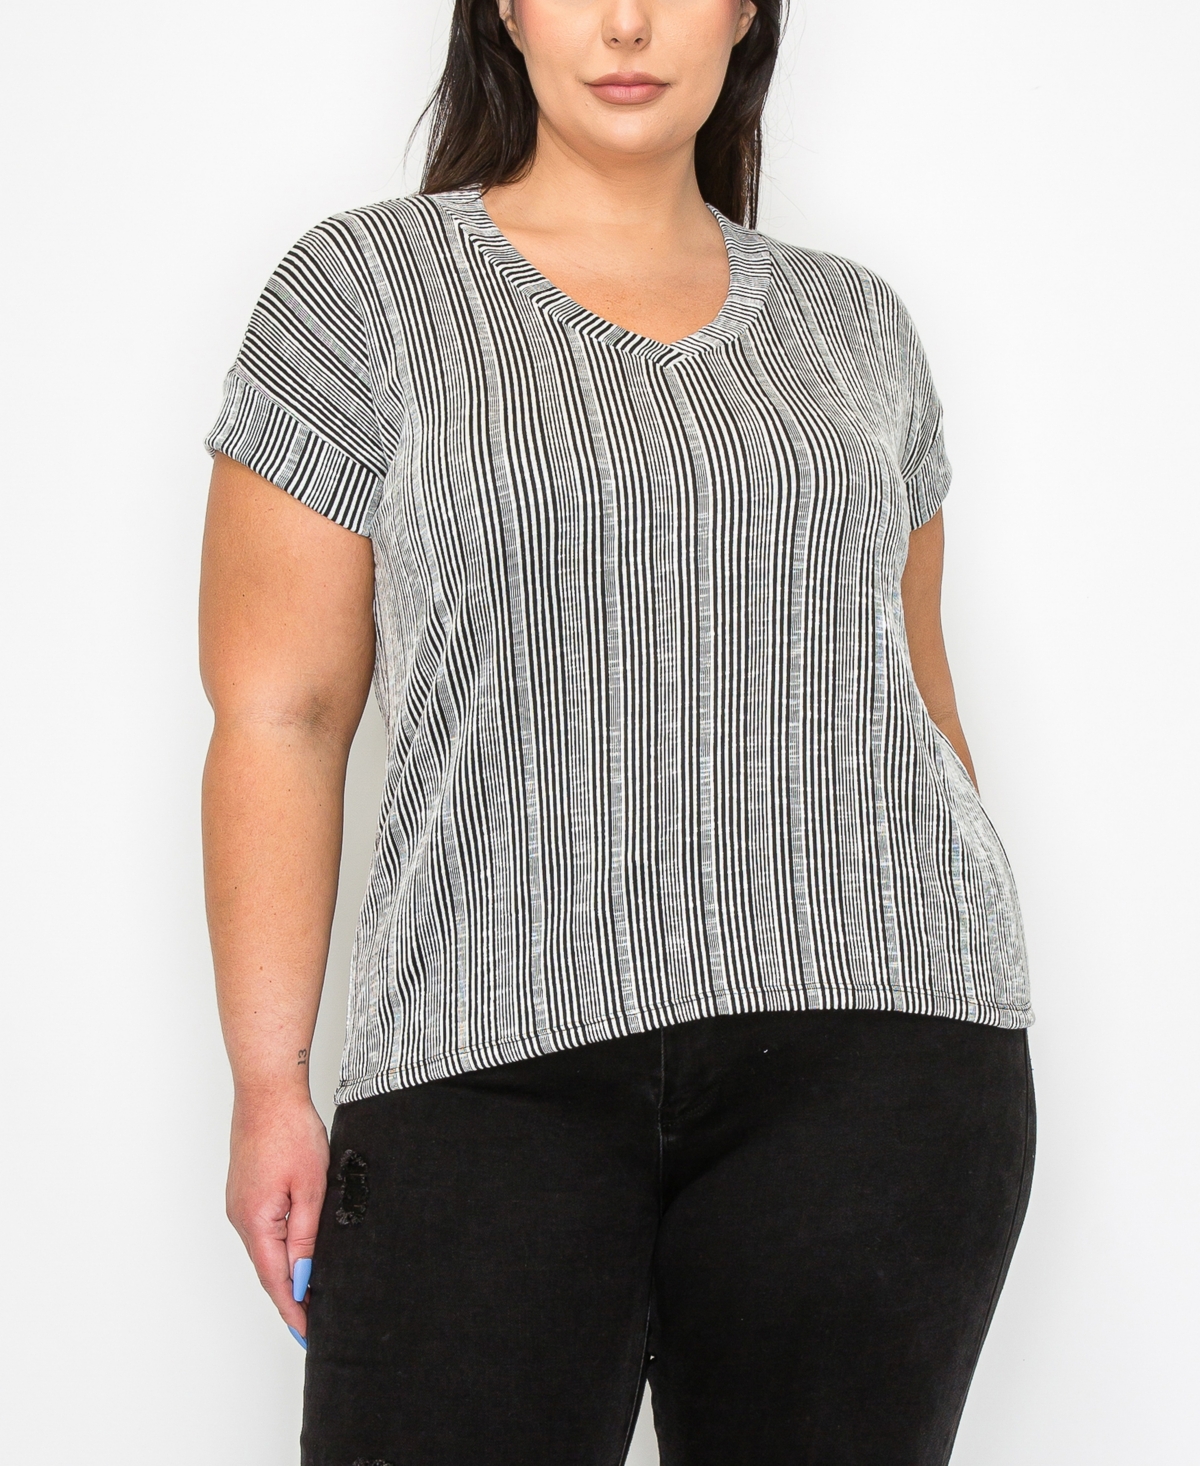 Coin 1804 Plus Size Variegated Textured Stripe V Neck Band Sleeve Top In Black Ivory